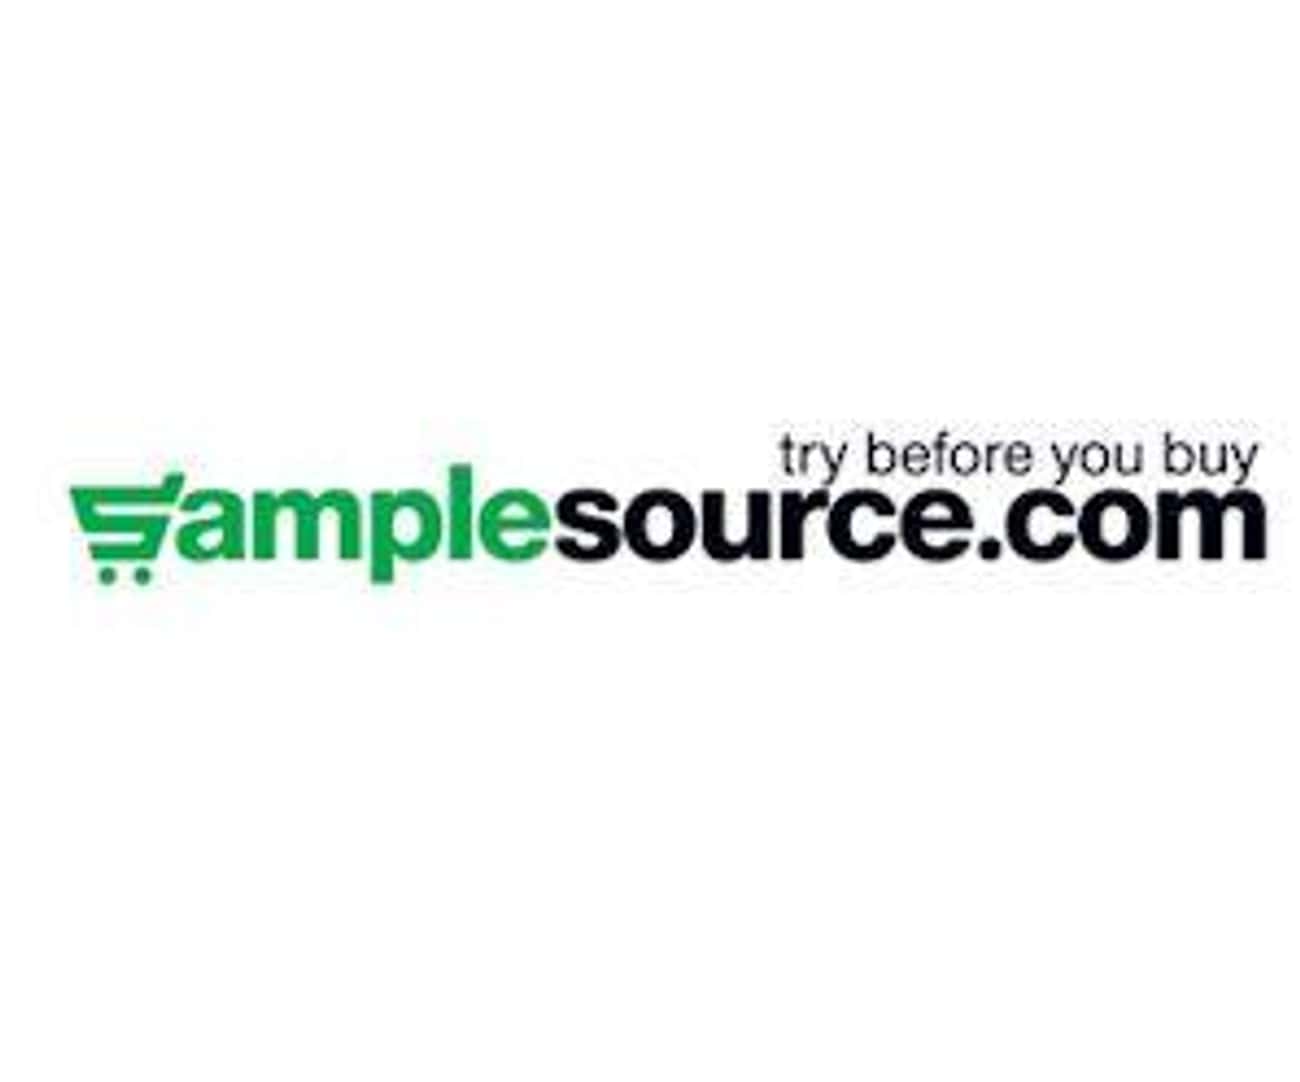 SampleSource Is A Great Way To Get Free Stuff With Little Effort